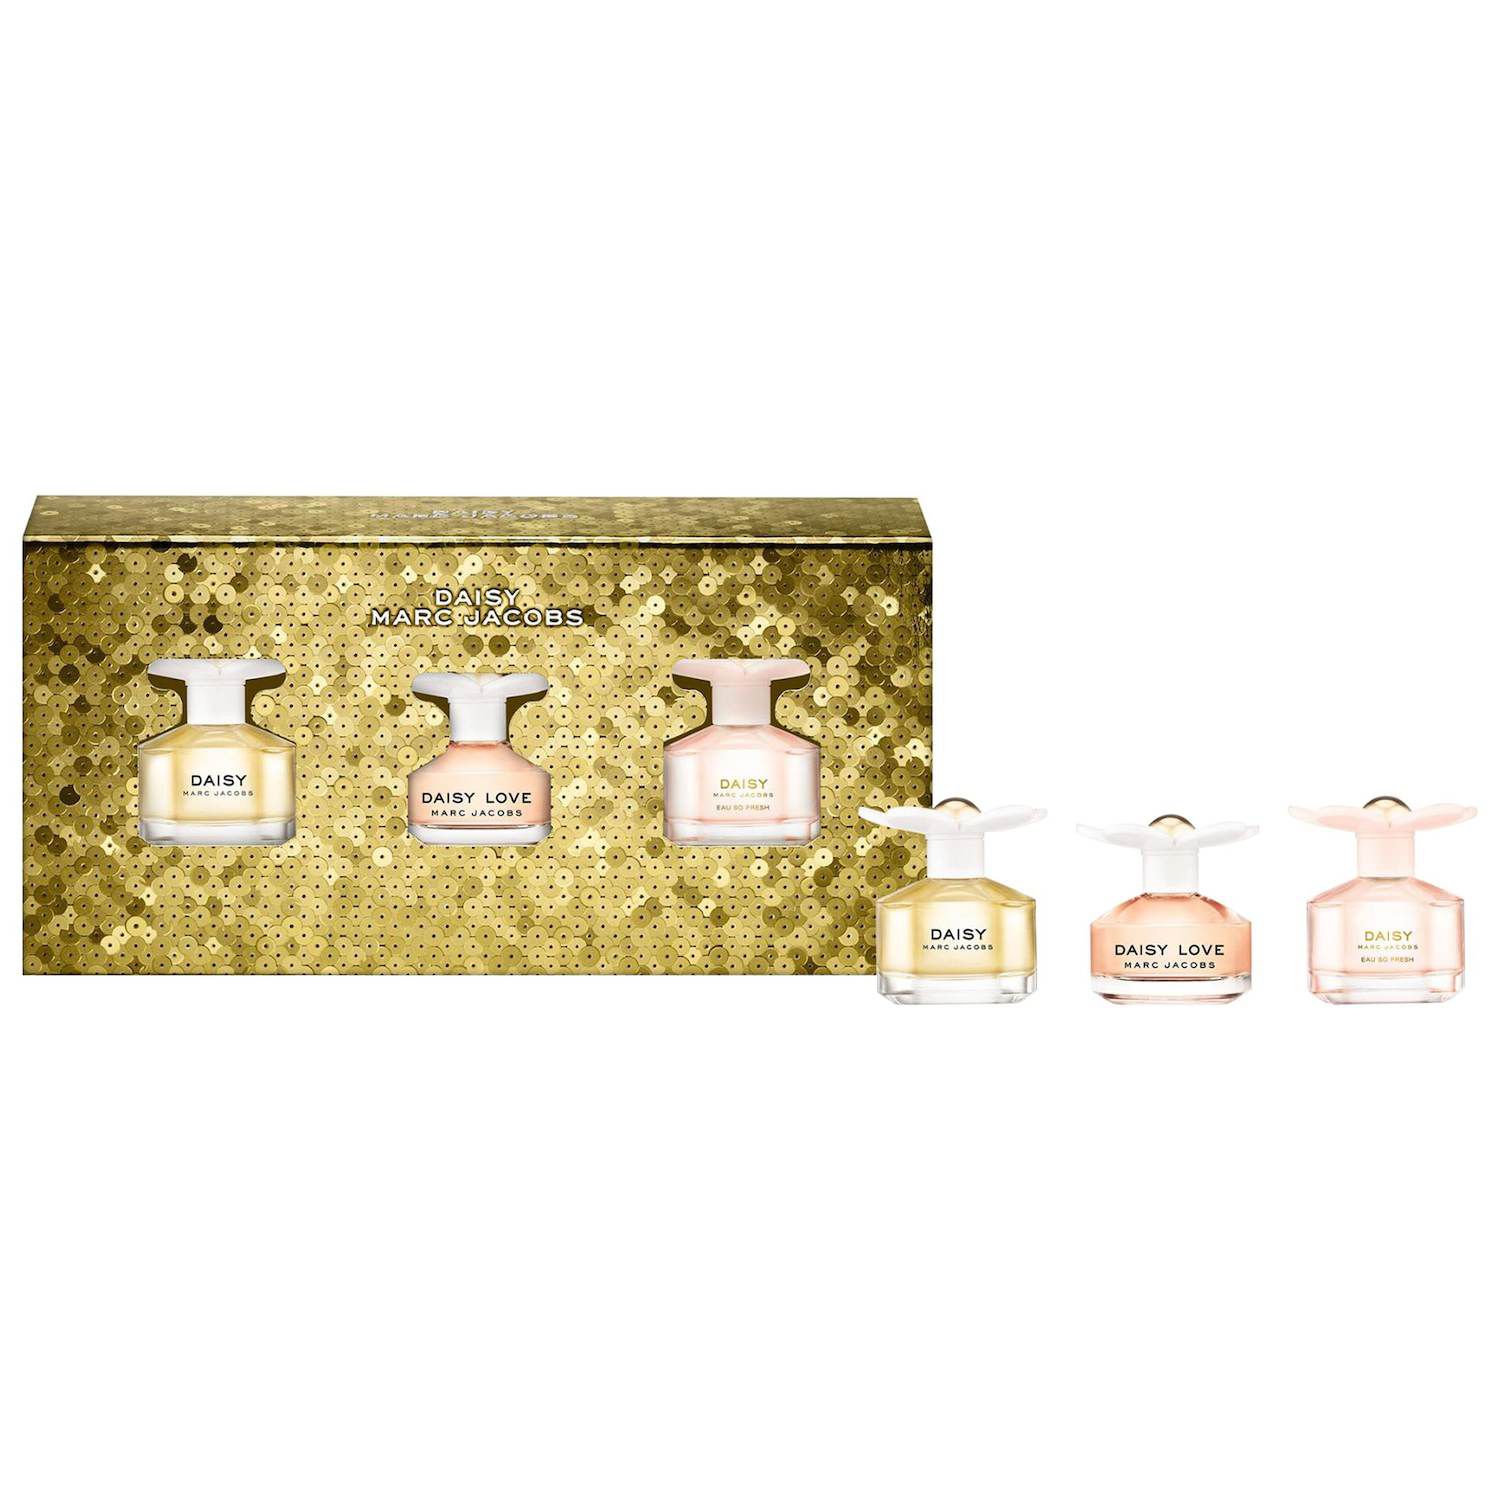 239 Value) Gucci Bloom Perfume Gift Set For Women, 3 Pieces 